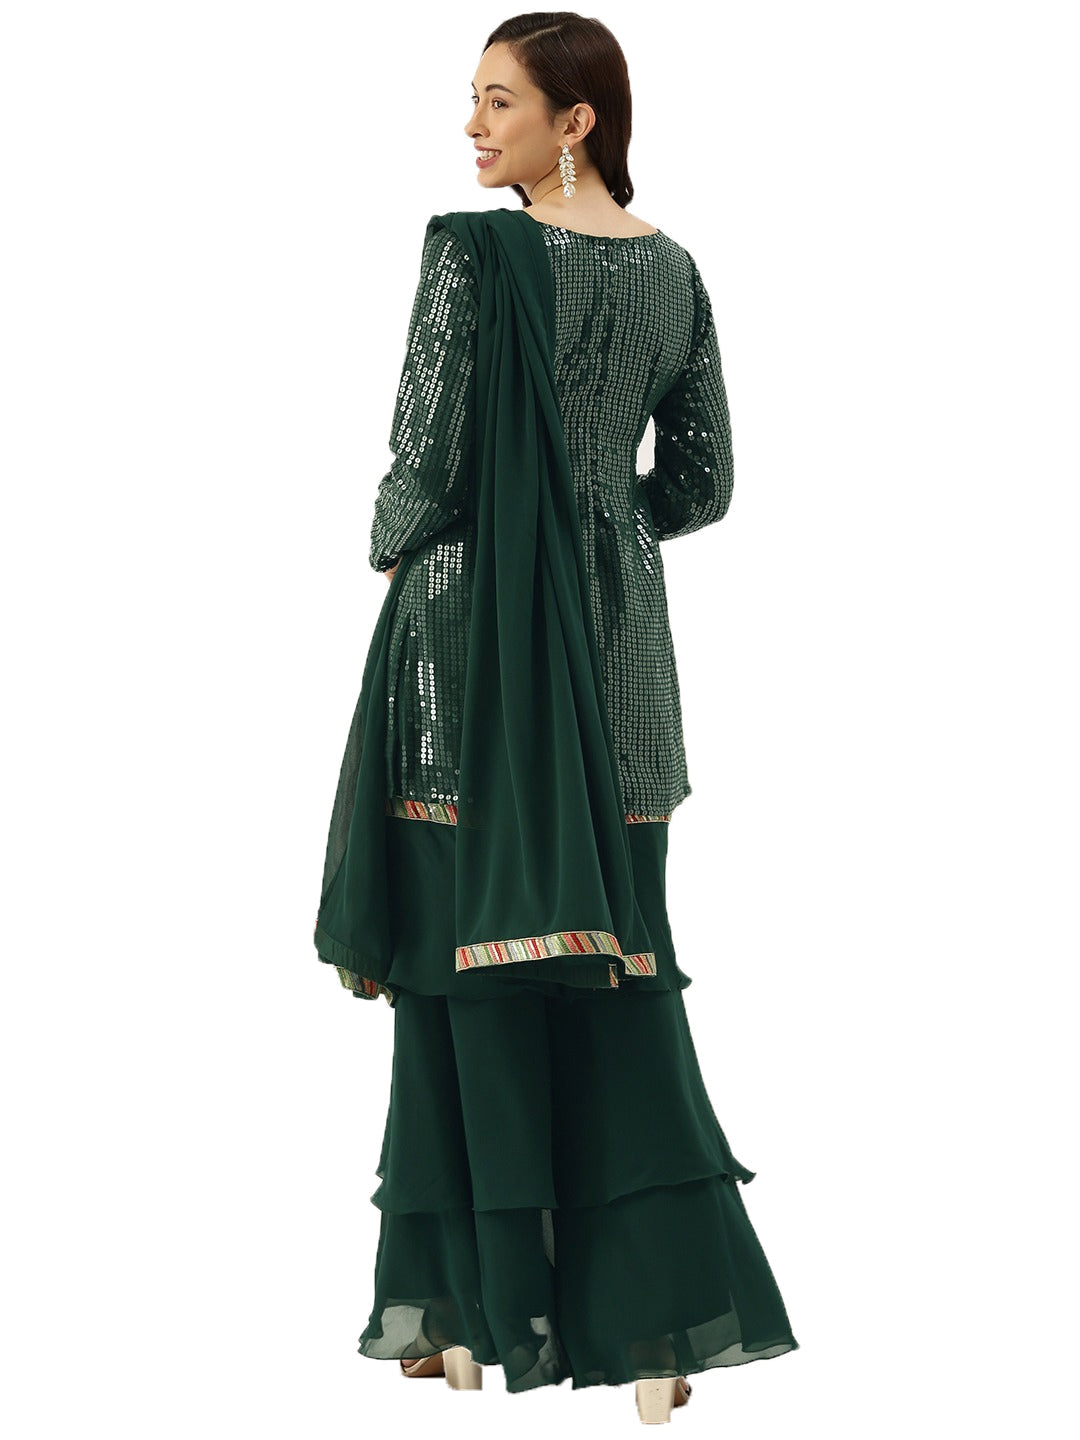 Green-Embroidered-Layered-Gharara-Suit